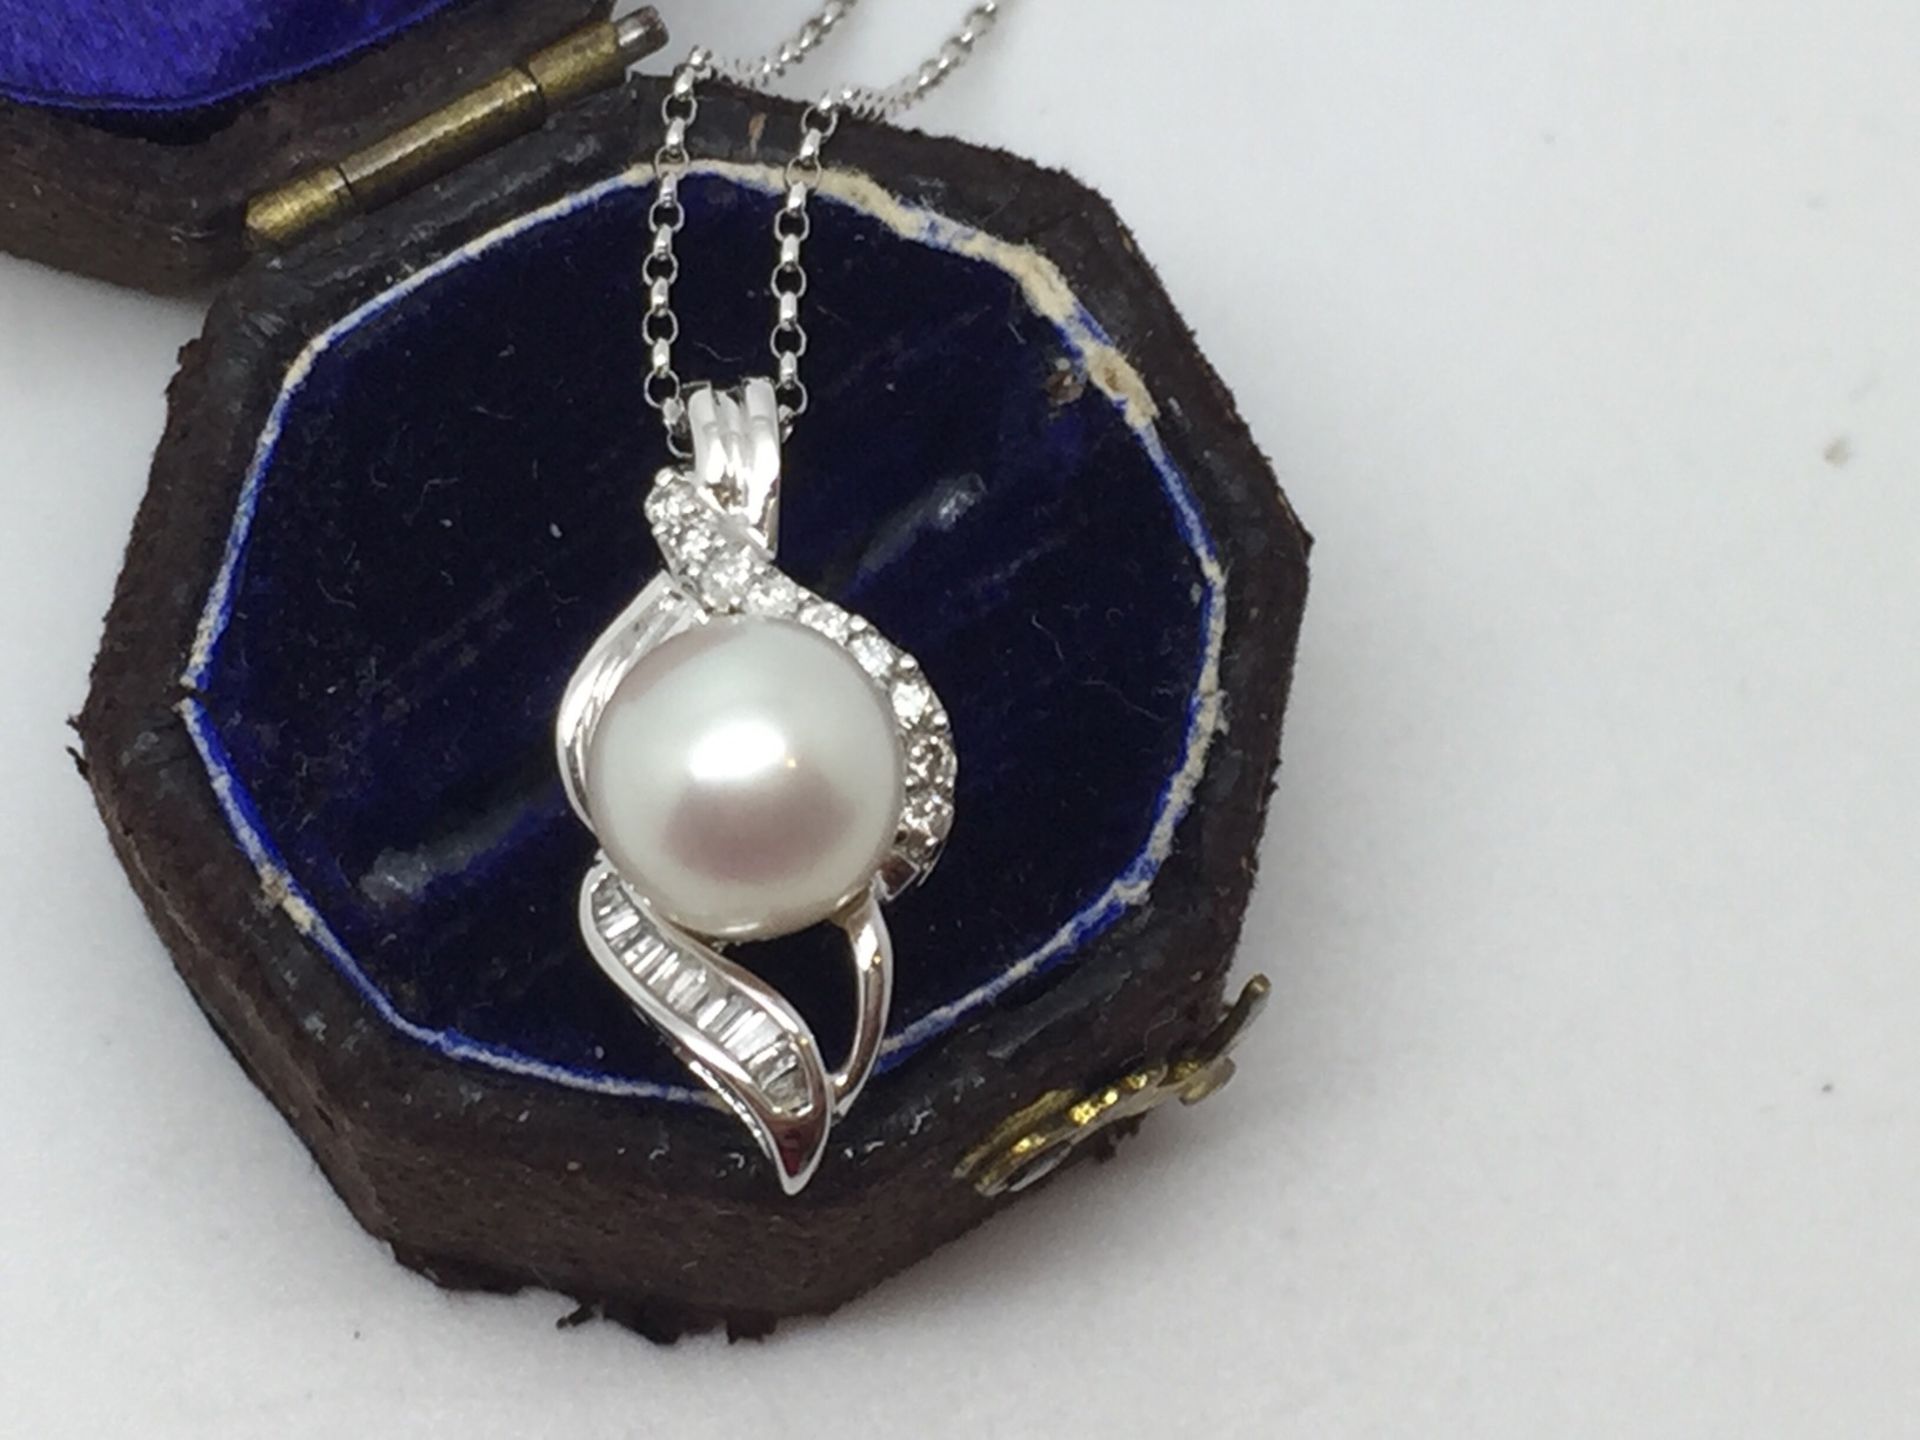 AKOYA PEARL & DIAMOND PENDANT SET IN 18k WHITE GOLD * ESTIMATED REPLACEMENT VALUE £1619.95 *